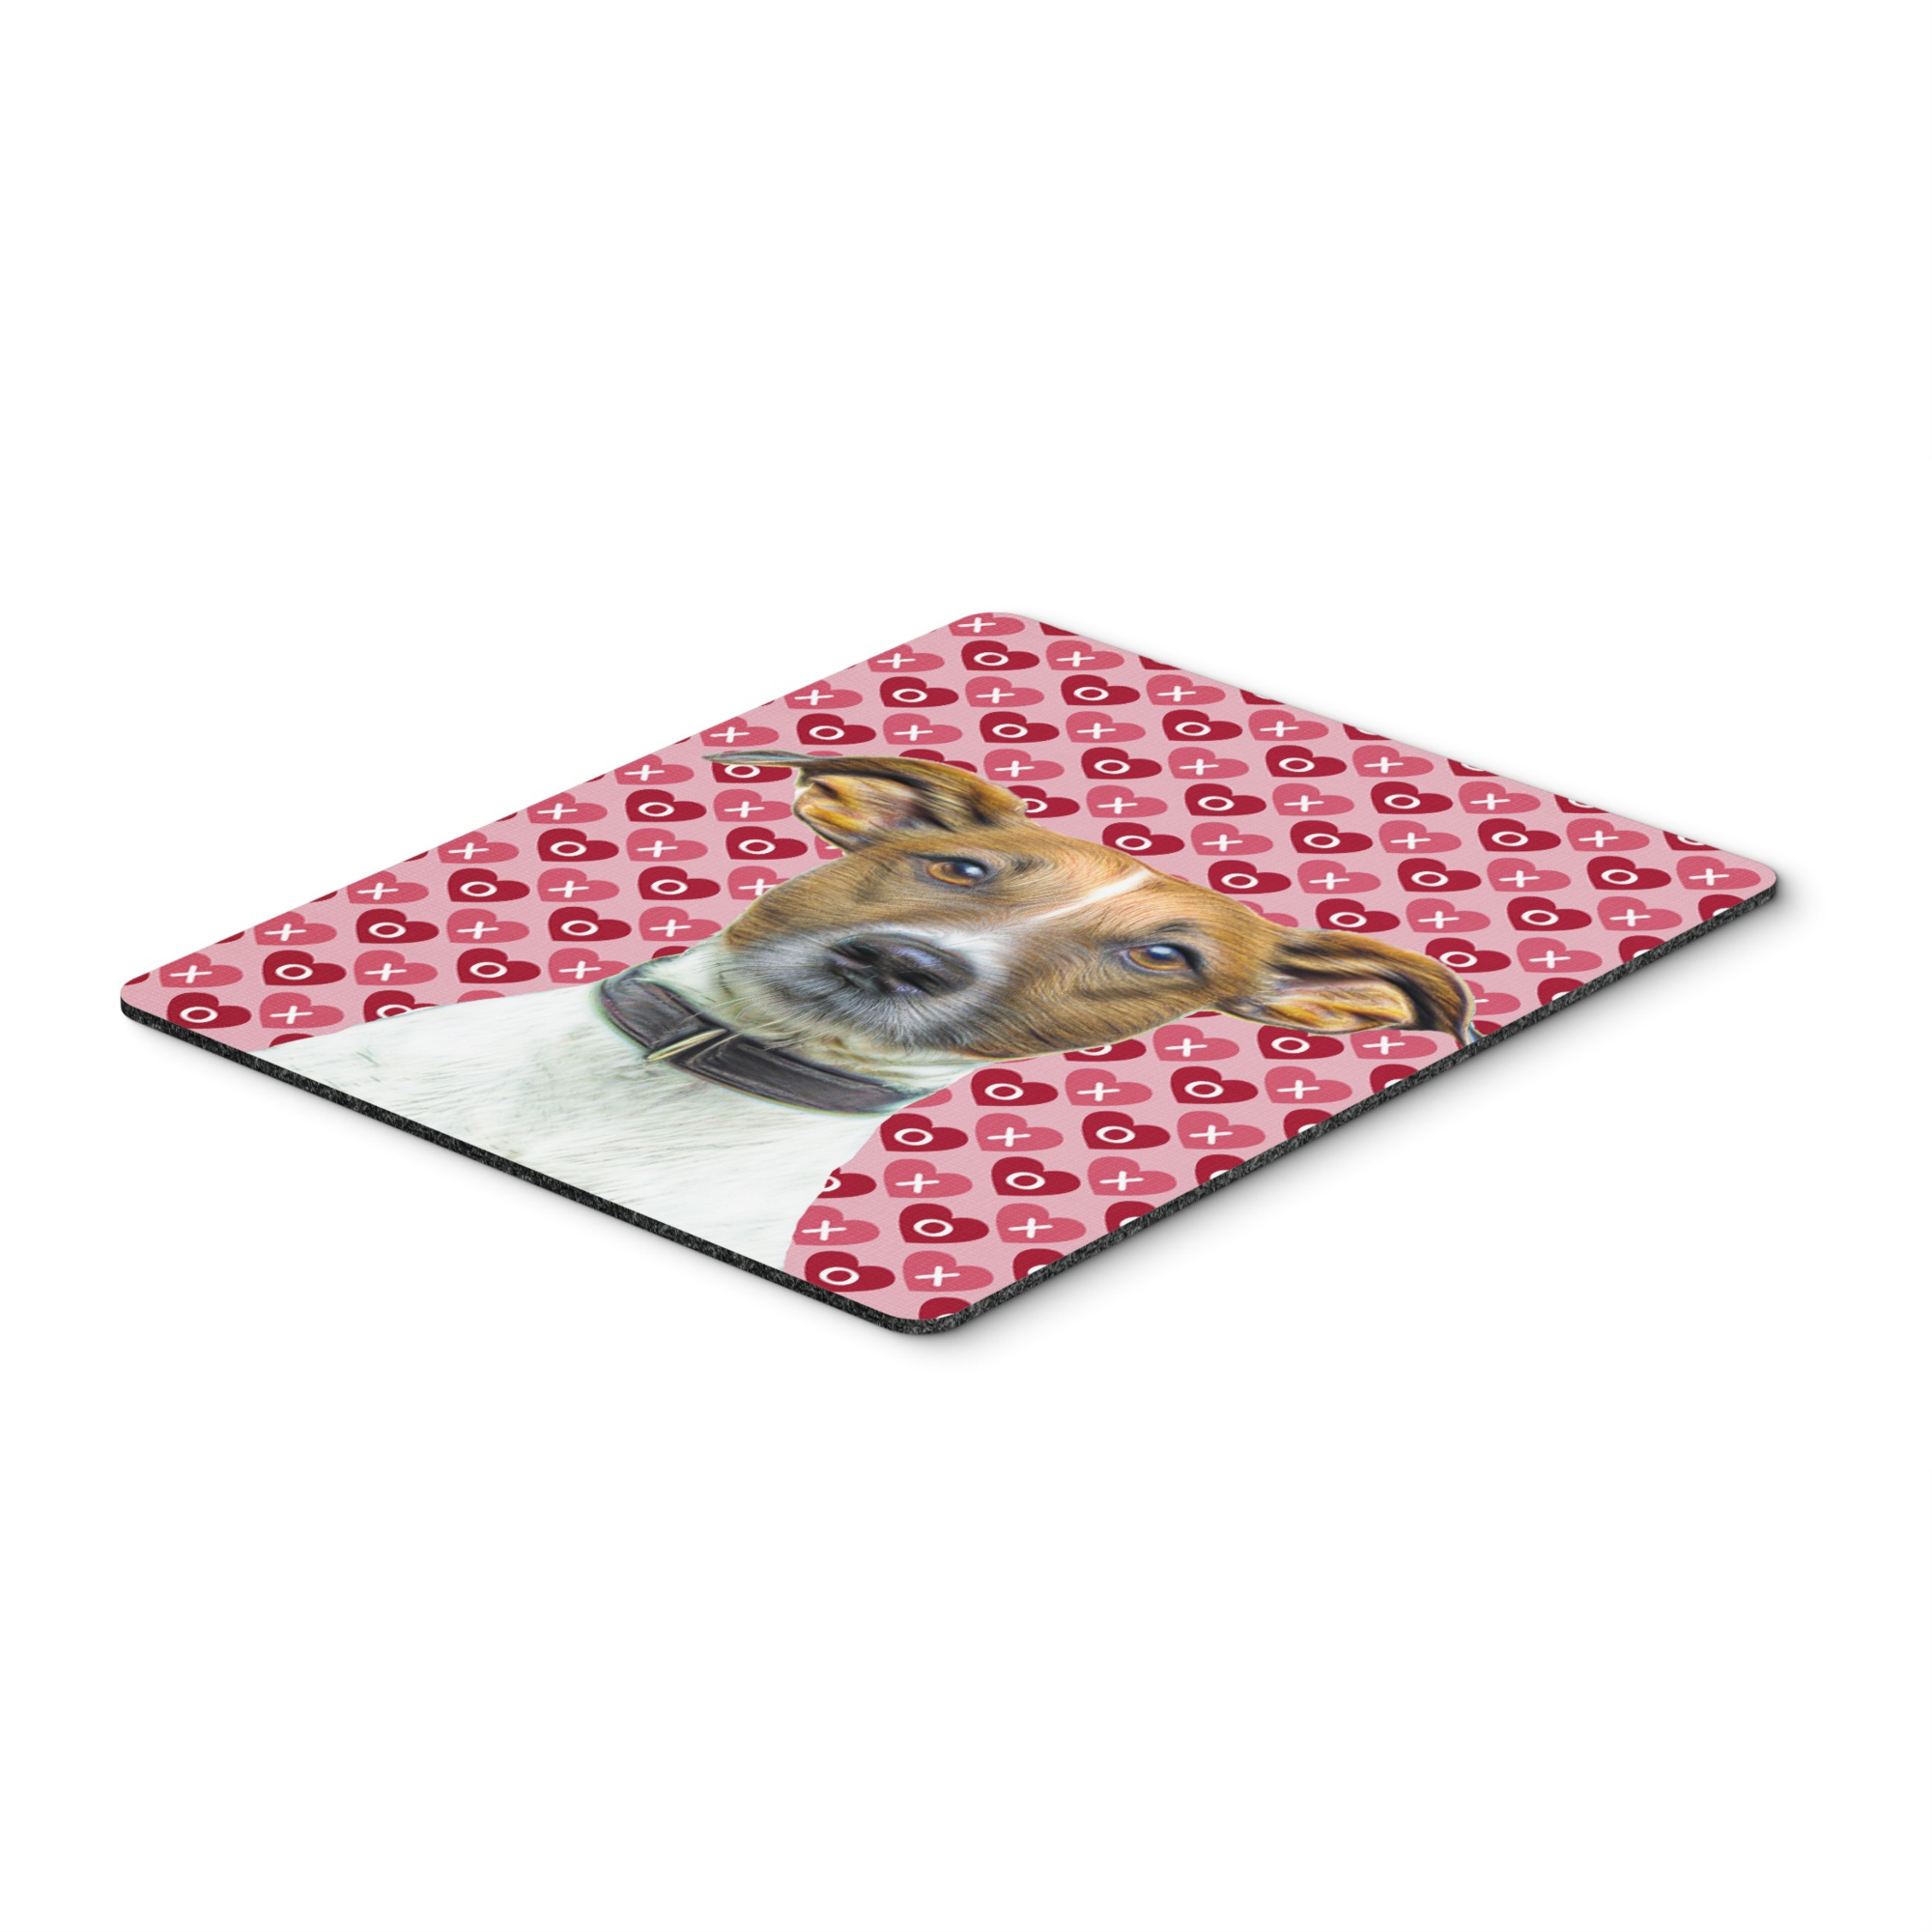 Caroline's Treasures "Caroline's Treasures Hearts Love and Valentine's Day Jack Russell Terrier Mouse Pad, Hot Pad/Trivet (KJ1190MP)"